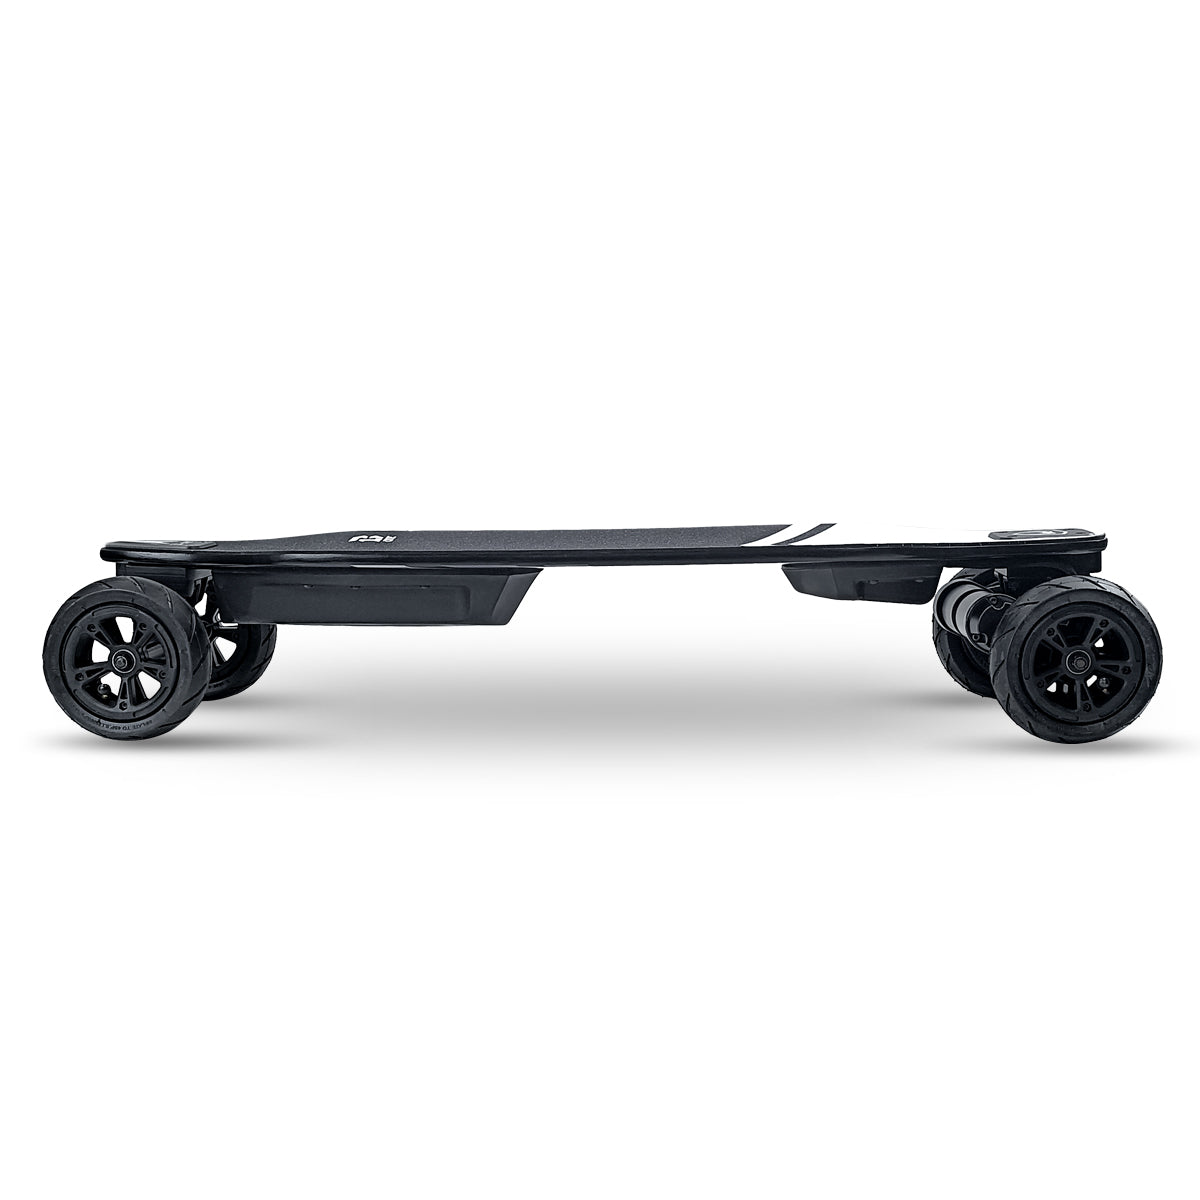 Performance electric skateboard for long commutes